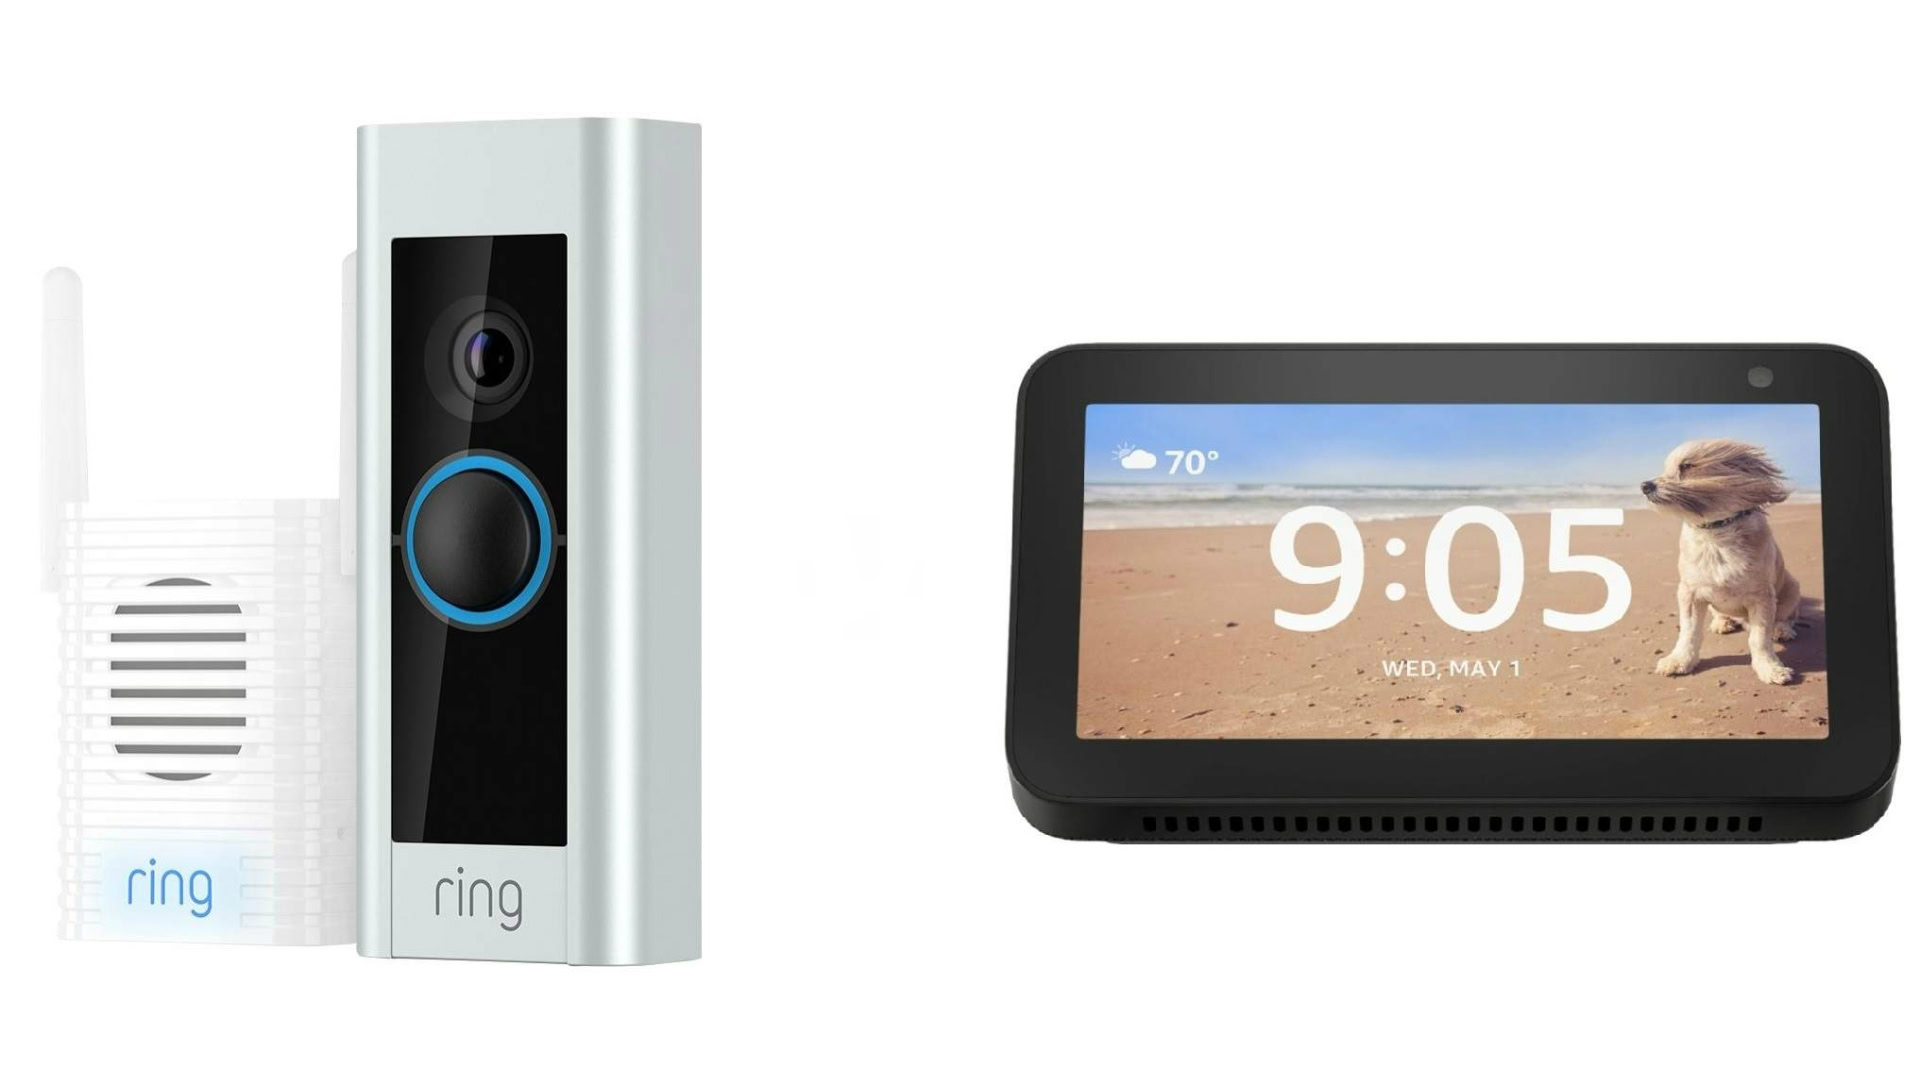 You can make your Ring doorbell sound like The Grinch for the holidays